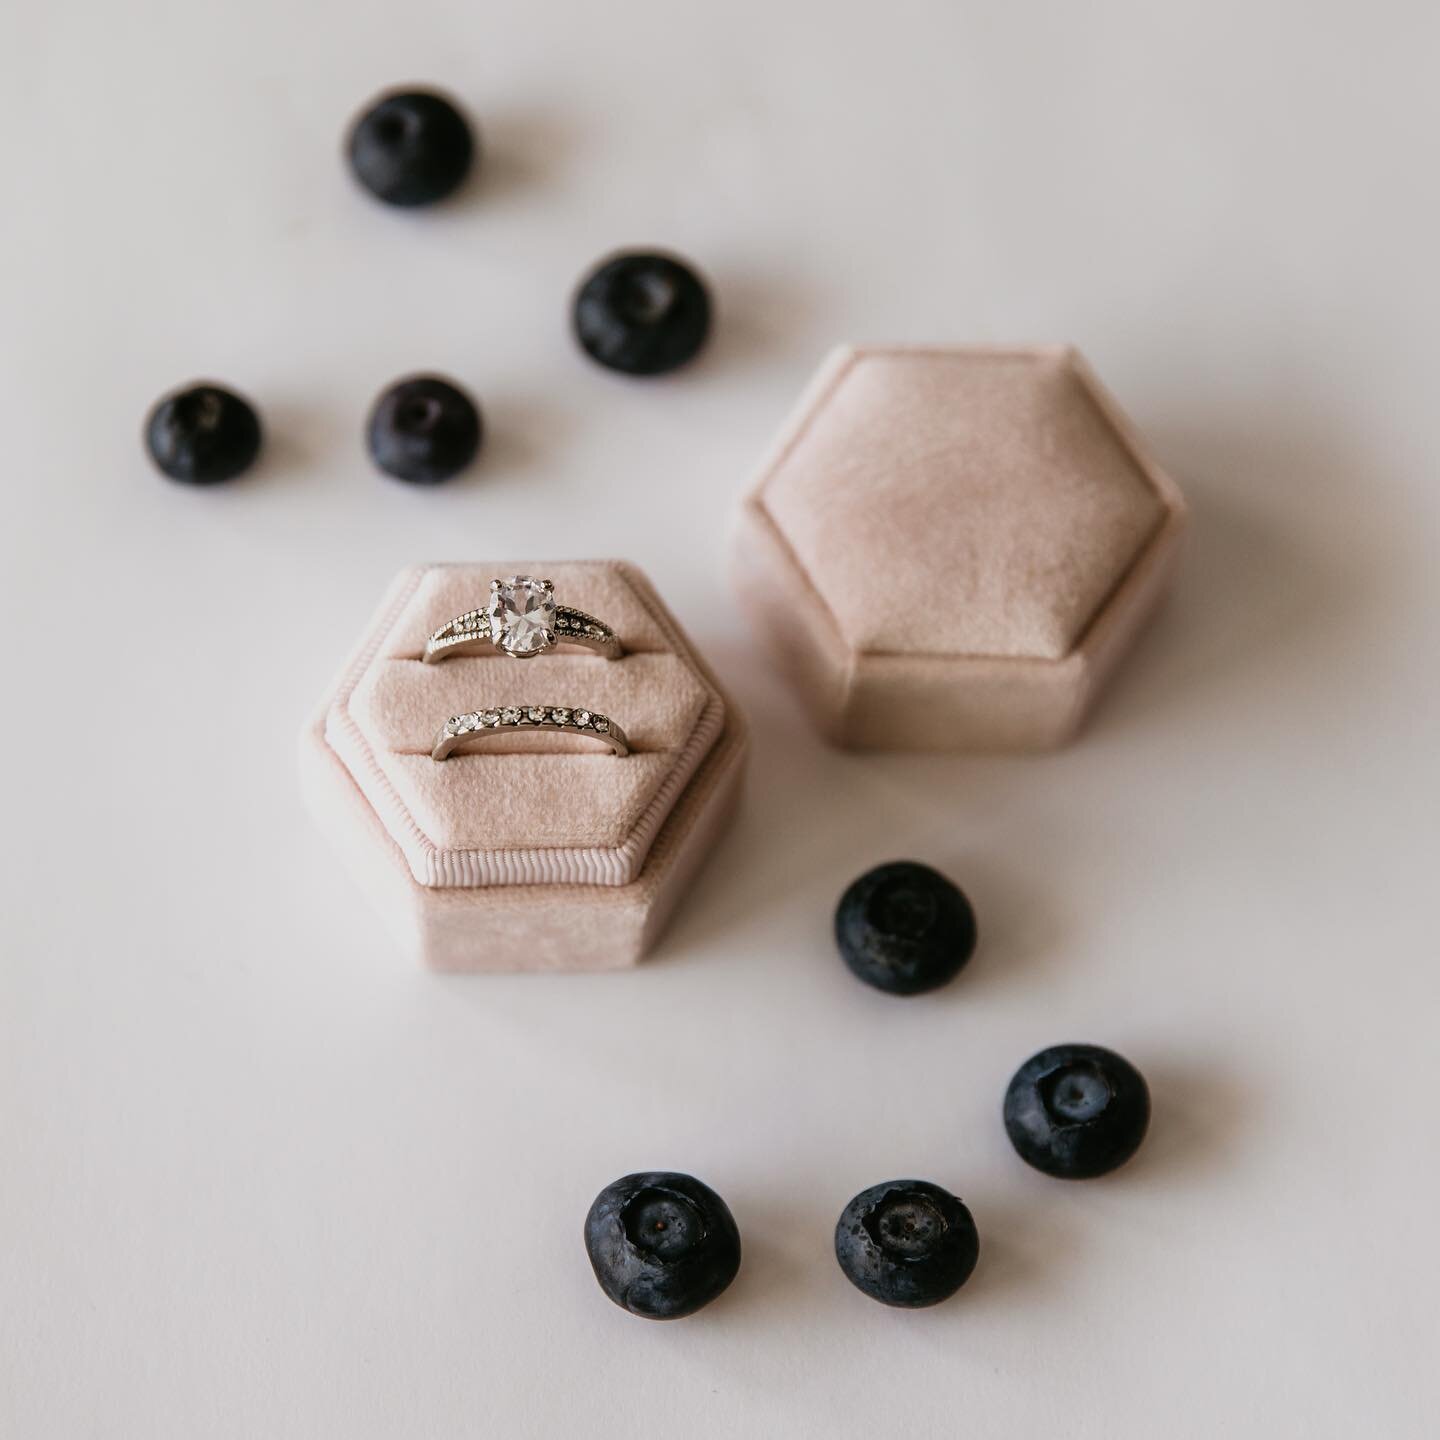 There isn&rsquo;t a more important piece of jewelry than your engagement ring and wedding band, our ring boxes provide safe storage for your rings with a soft velvet liner 🧡

#yeg #yyc #yvr #yyt #shoplocal #yegshoplocal #yycshoplocal #yyz #toronto #